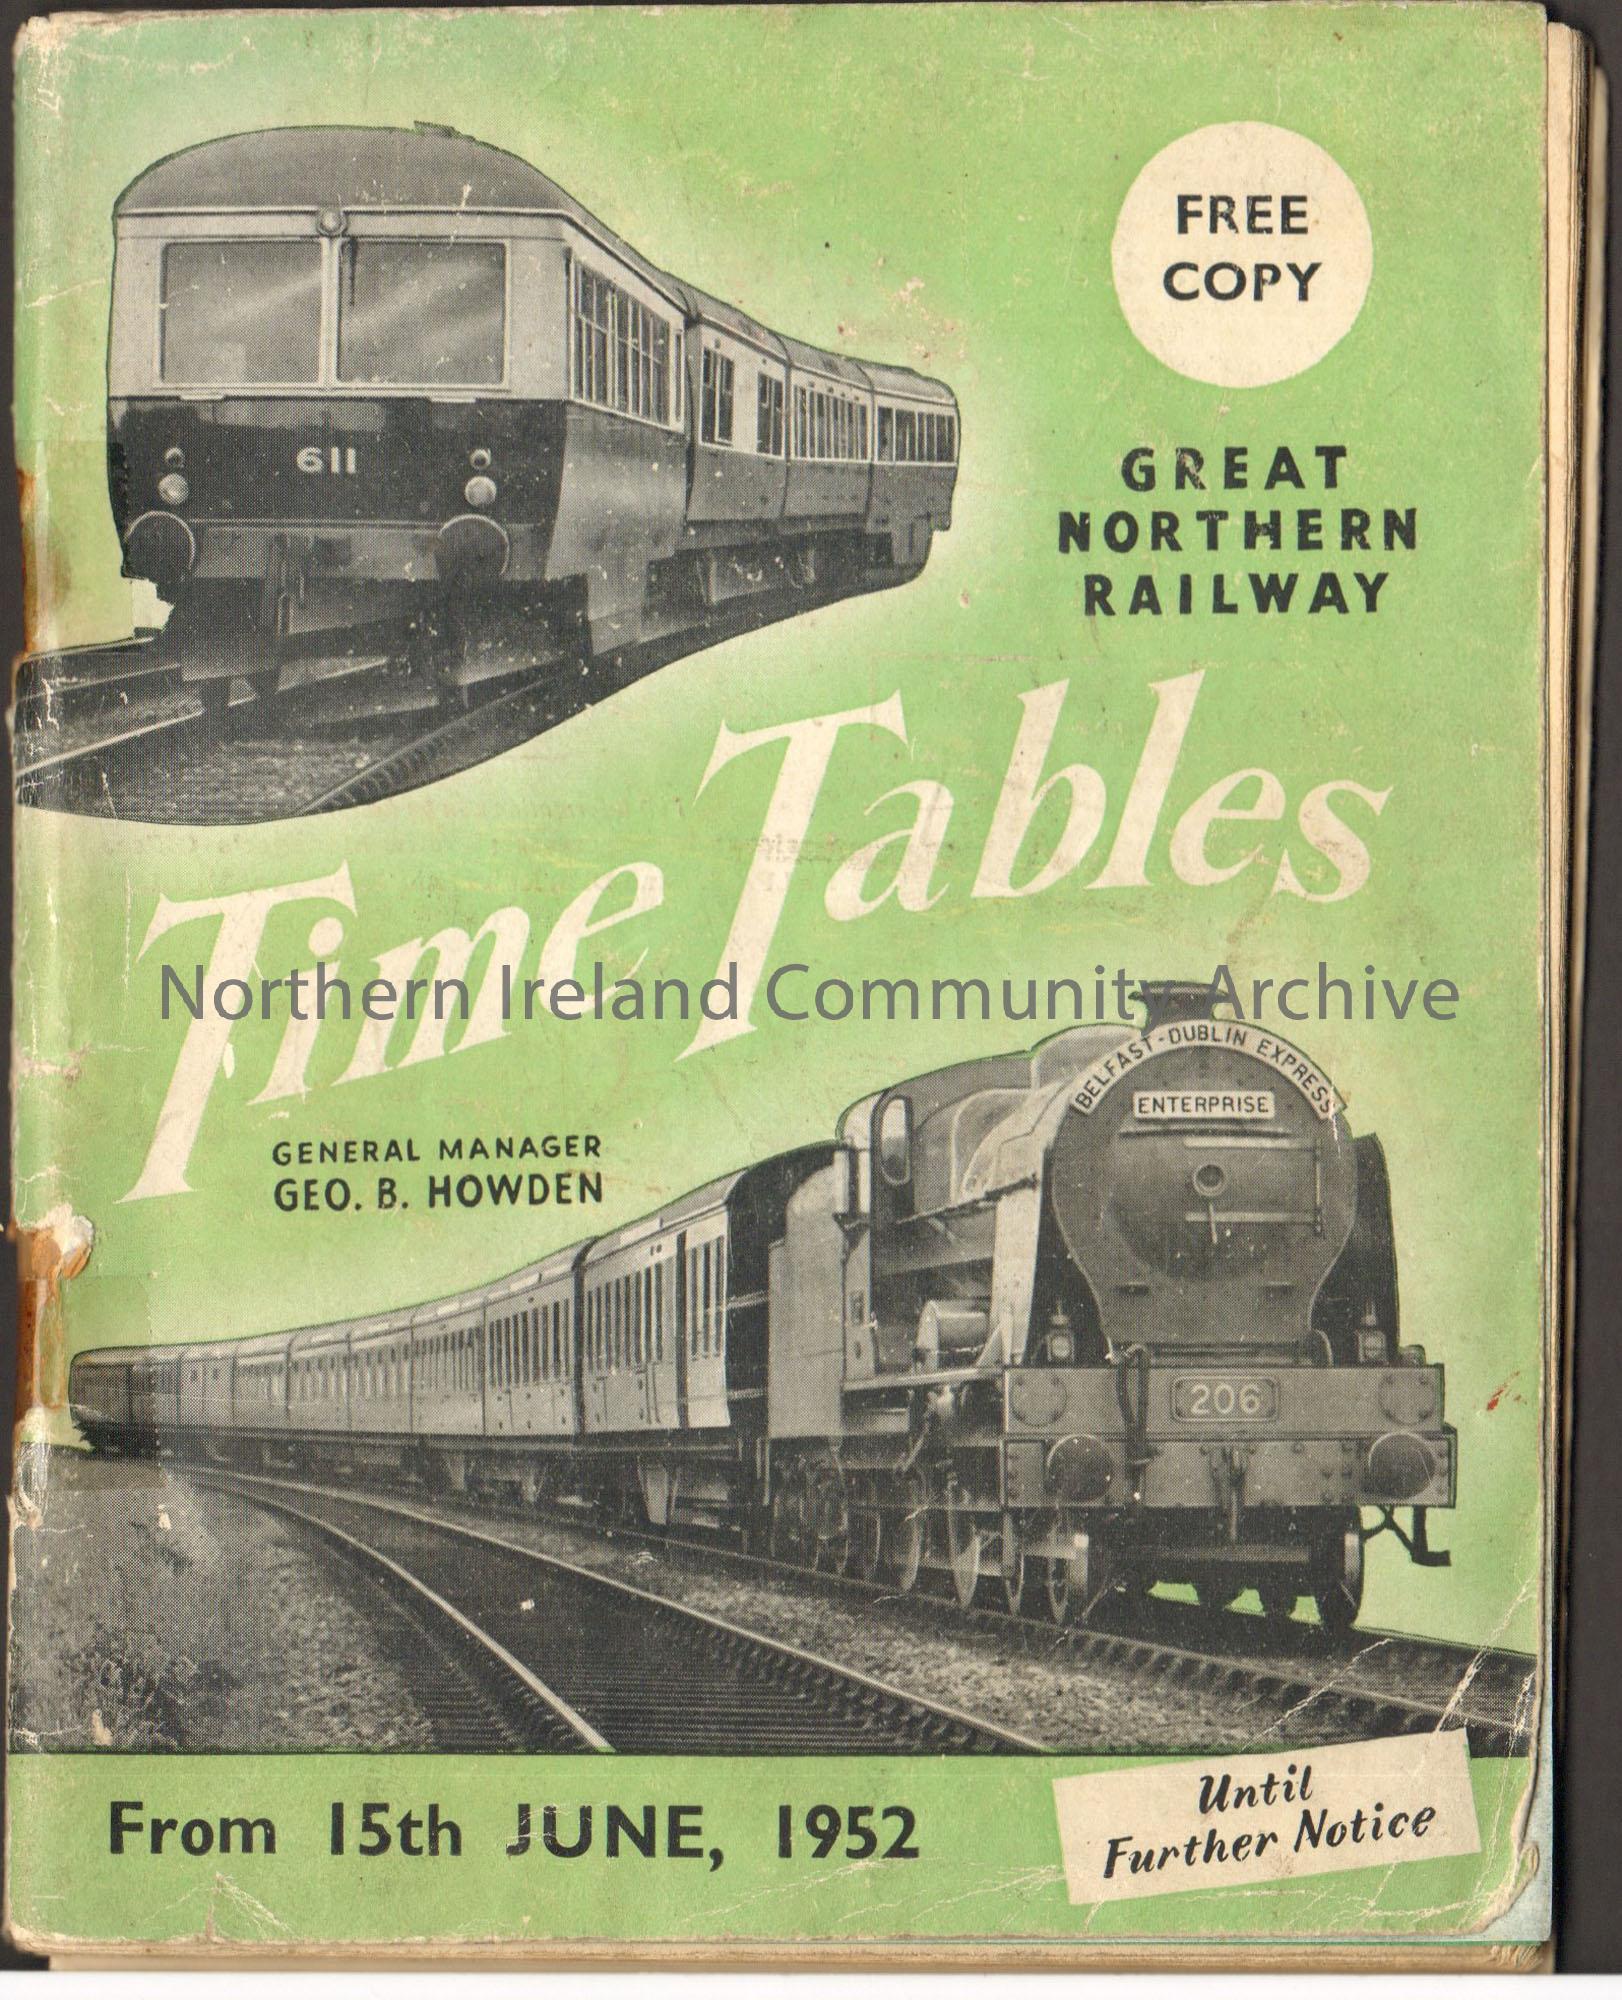 Great Northern Railway Time Tables, General Manager Geo.B.Howden. From 15th June, 1952